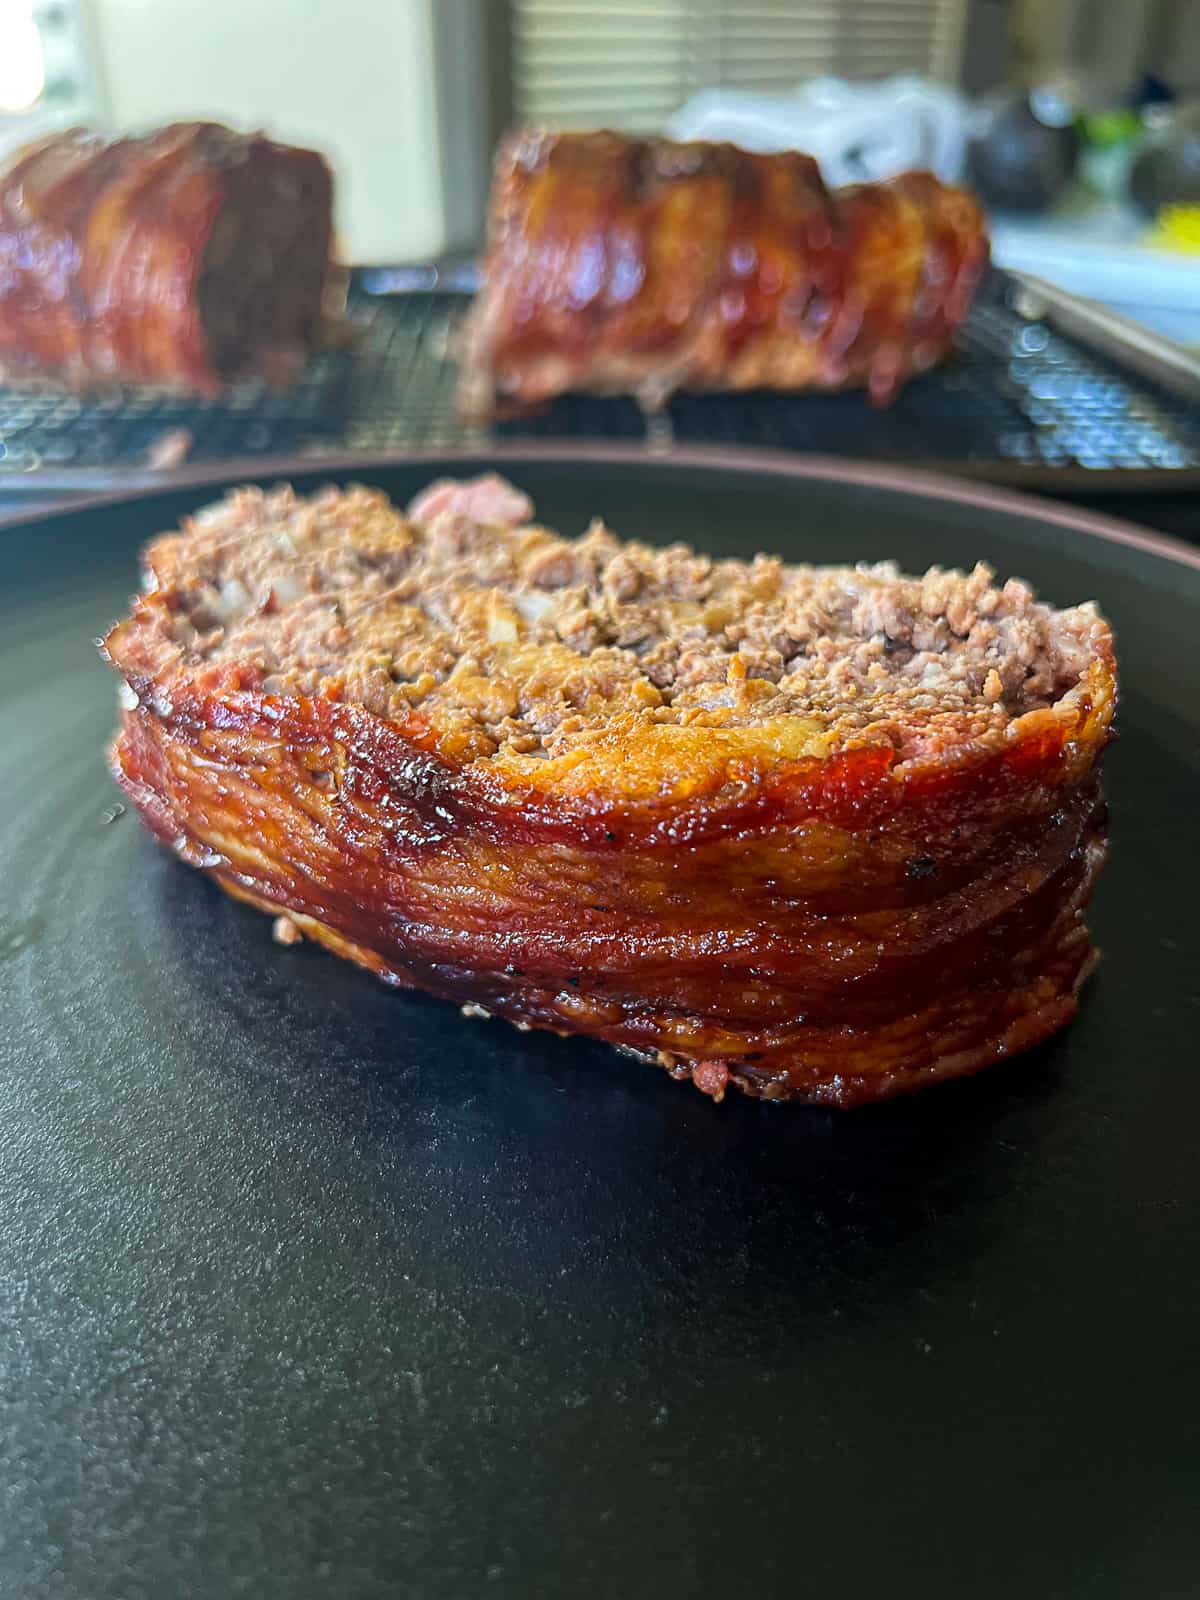 Slice of Traeger Smoked Bacon Wrapped Meatloaf